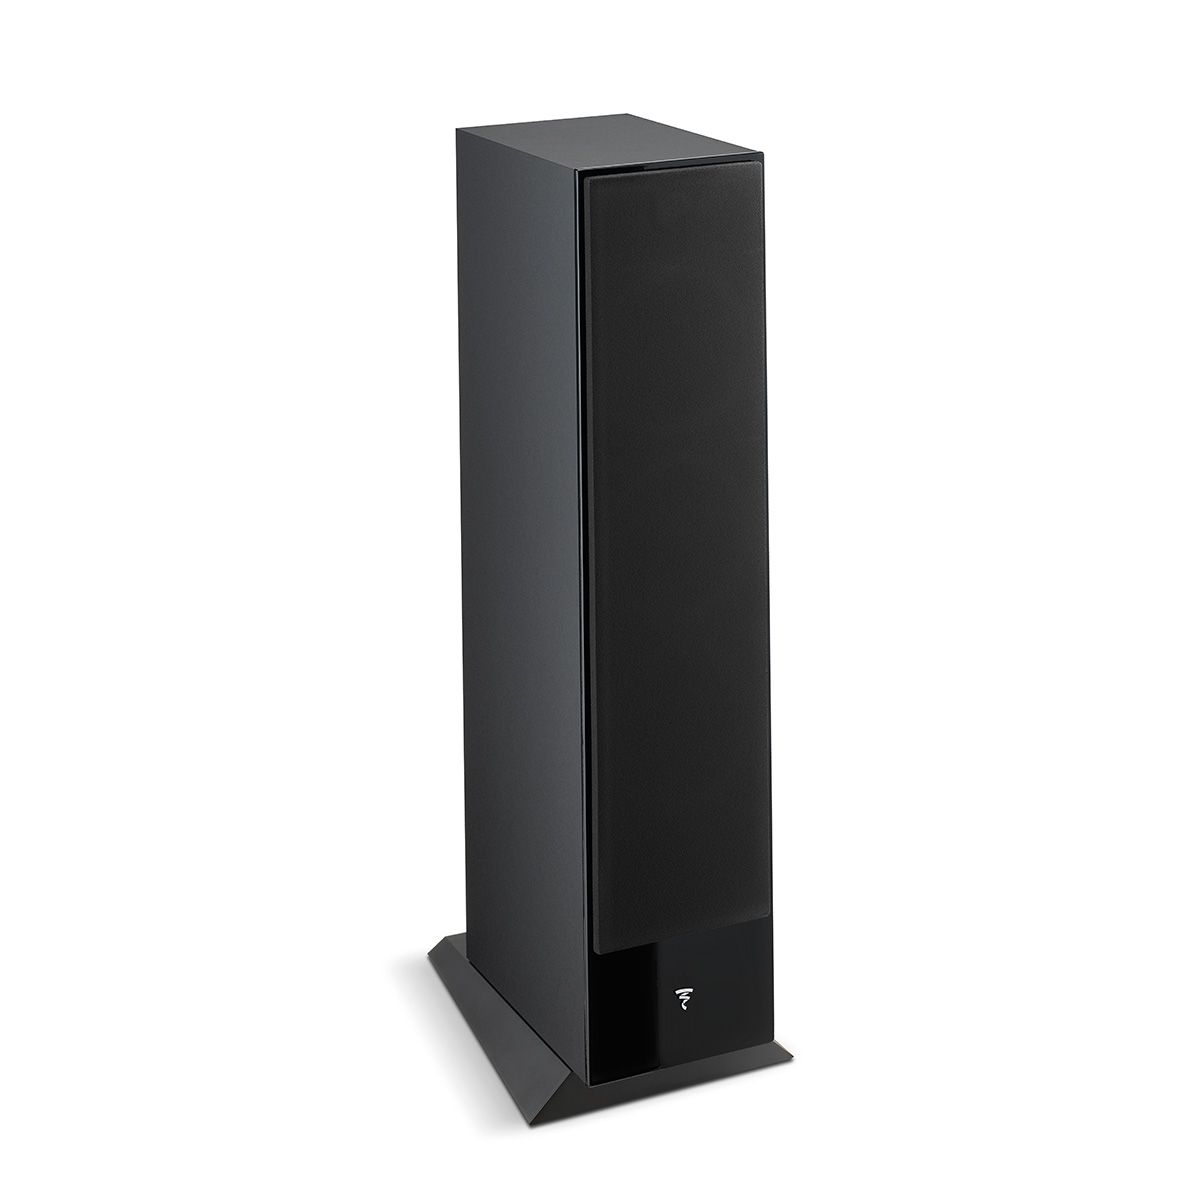 Focal Theva No3 Floorstanding Speaker - Each - angled front left view with grille